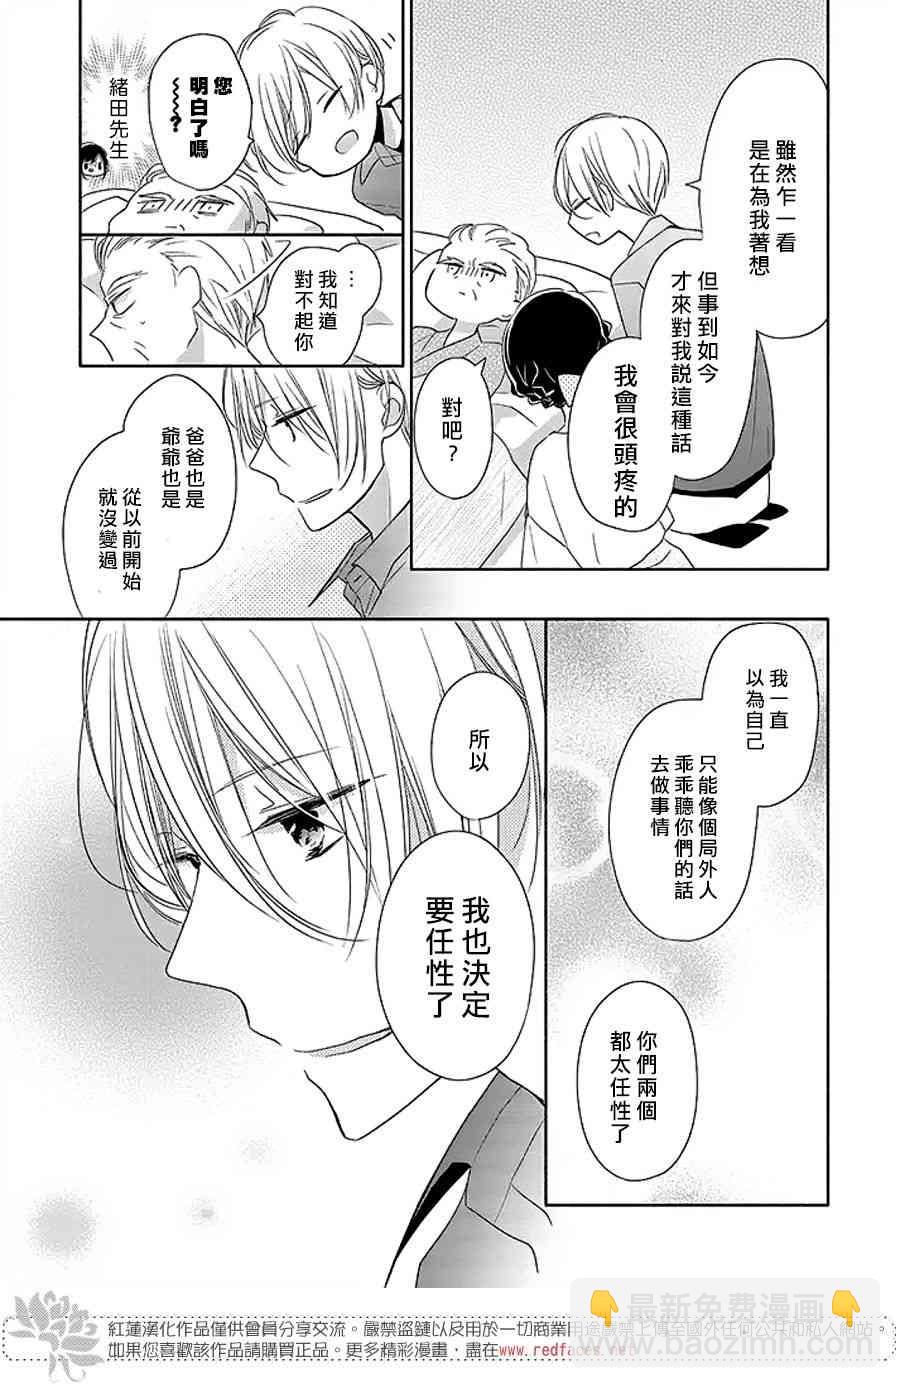 If given a second chance - 13話 - 1